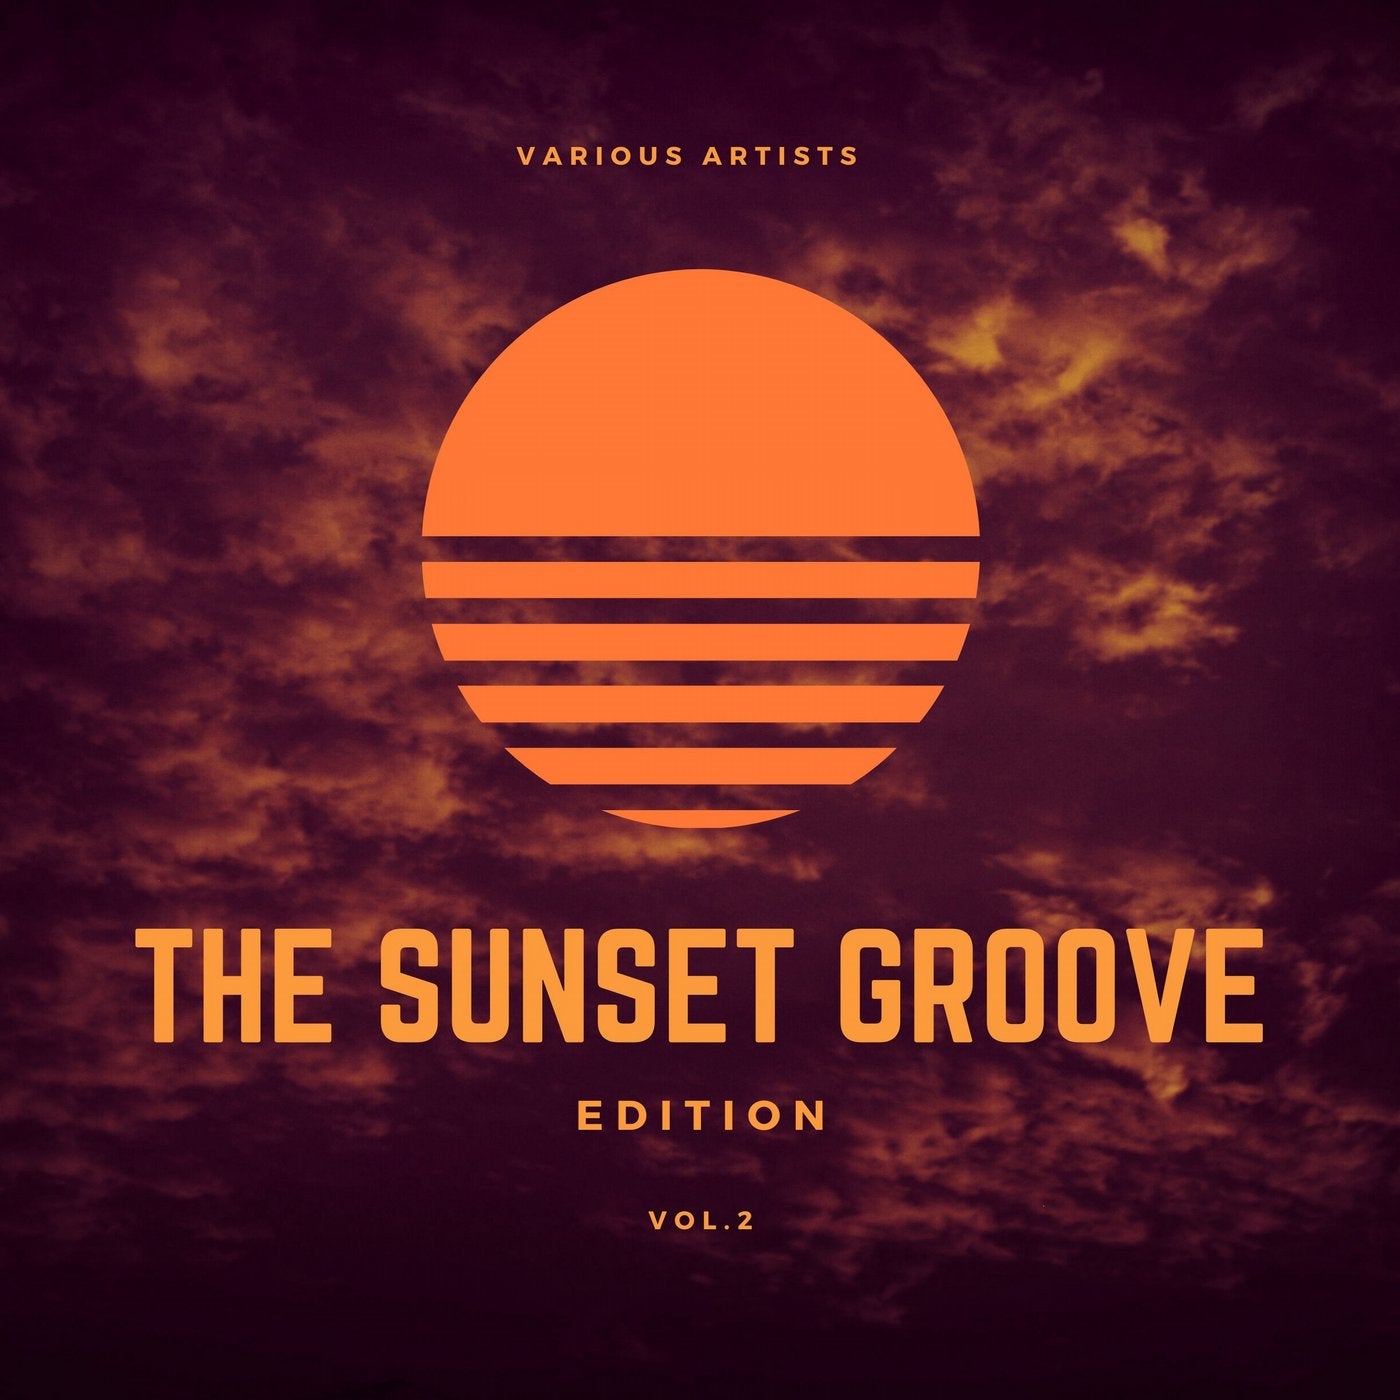 The Sunset Groove Edition, Vol. 2